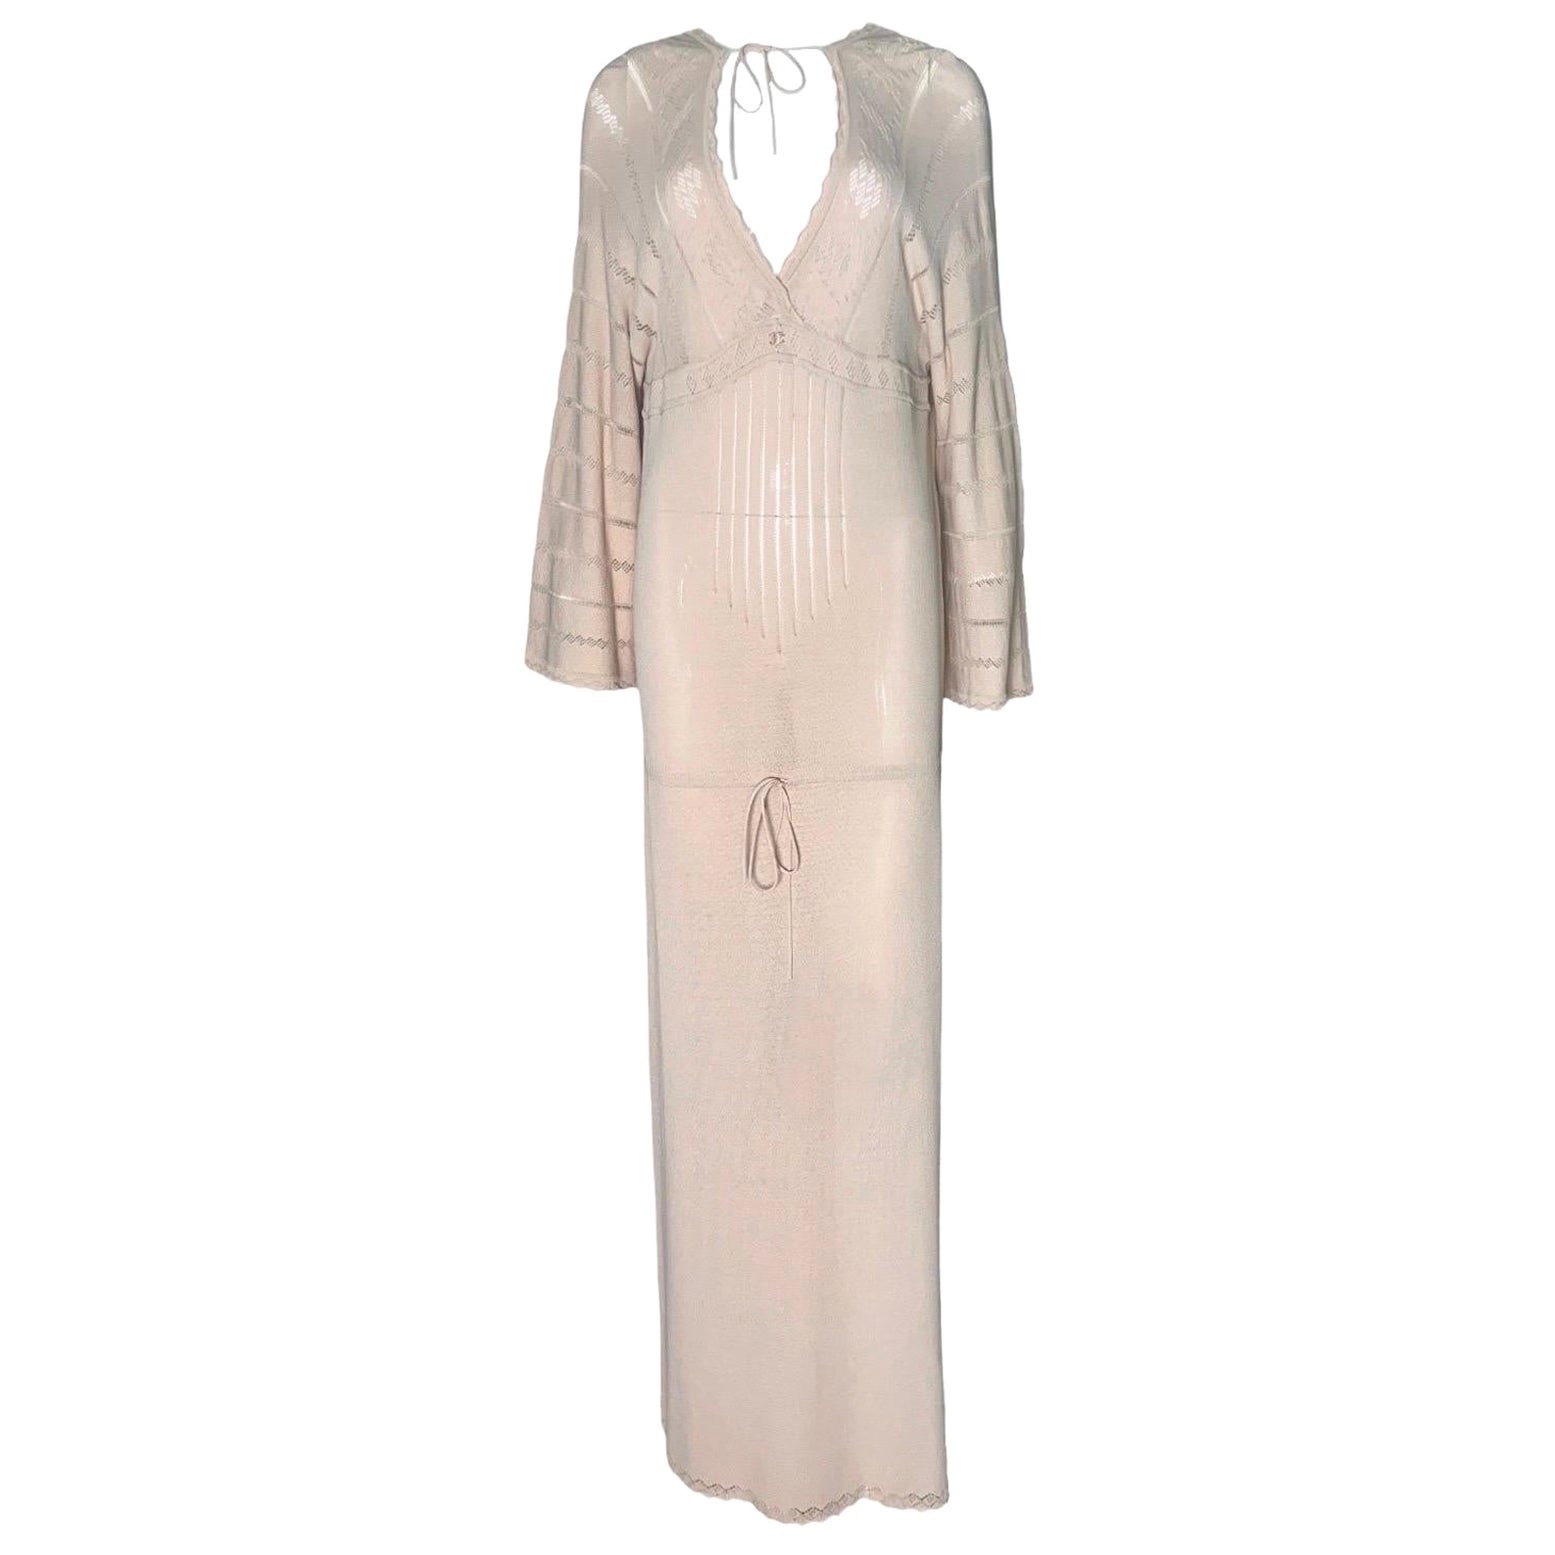 CHANEL Nude Knit Maxi Evening Dress Kaftan Tunic Beach Pool Cover Up  38 For Sale